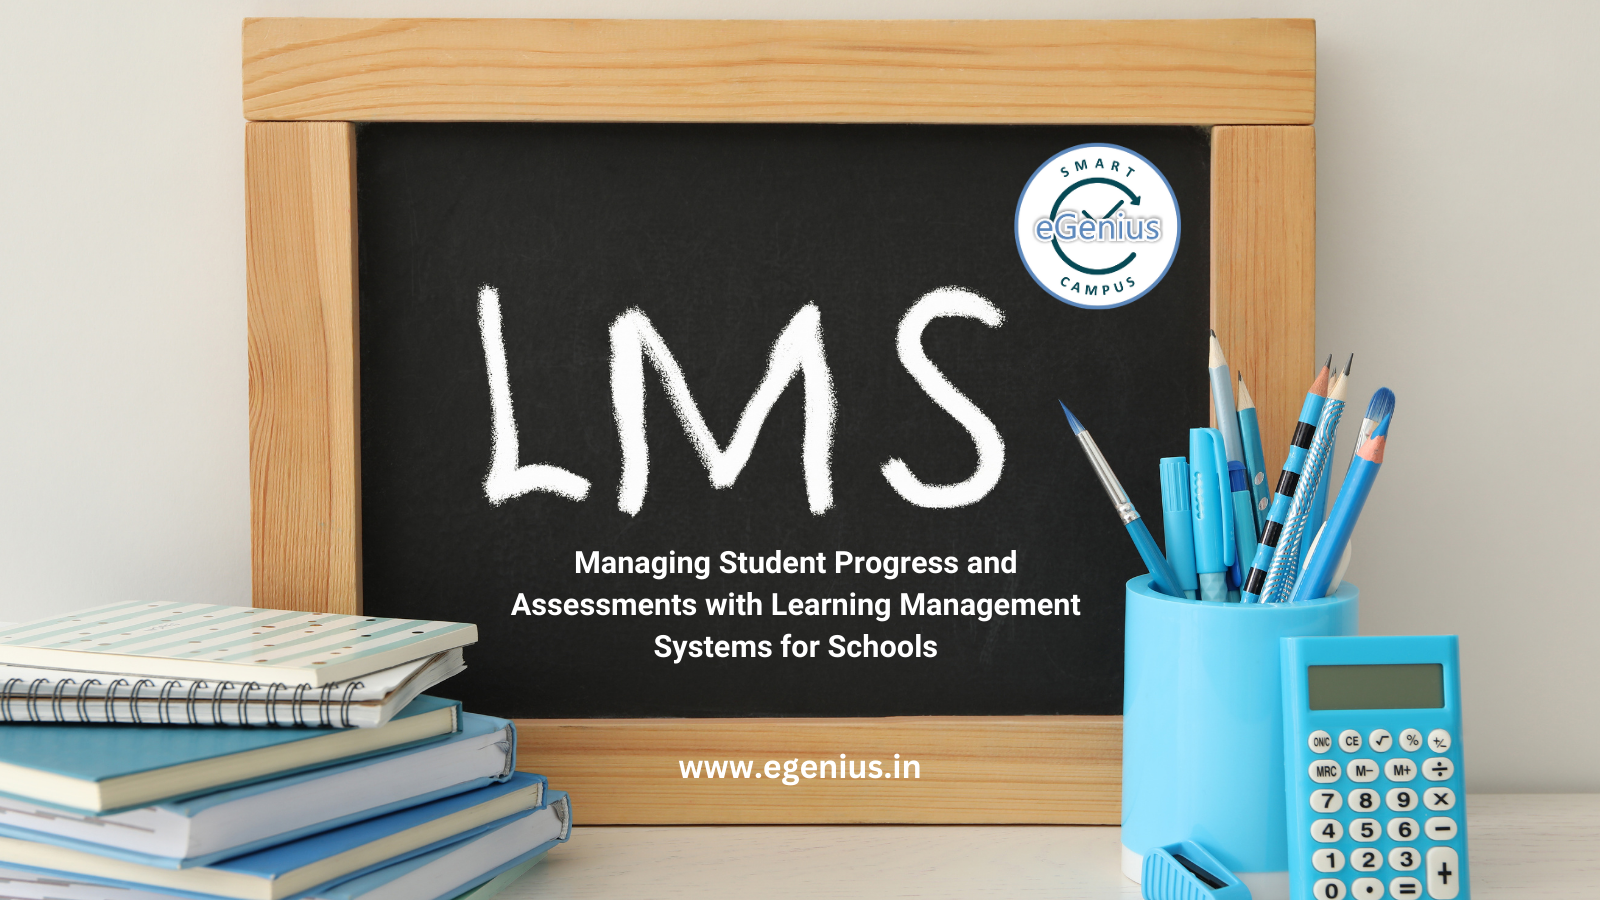 Learning Management Systems for Schools: Managing Student Progress and Assessments. 